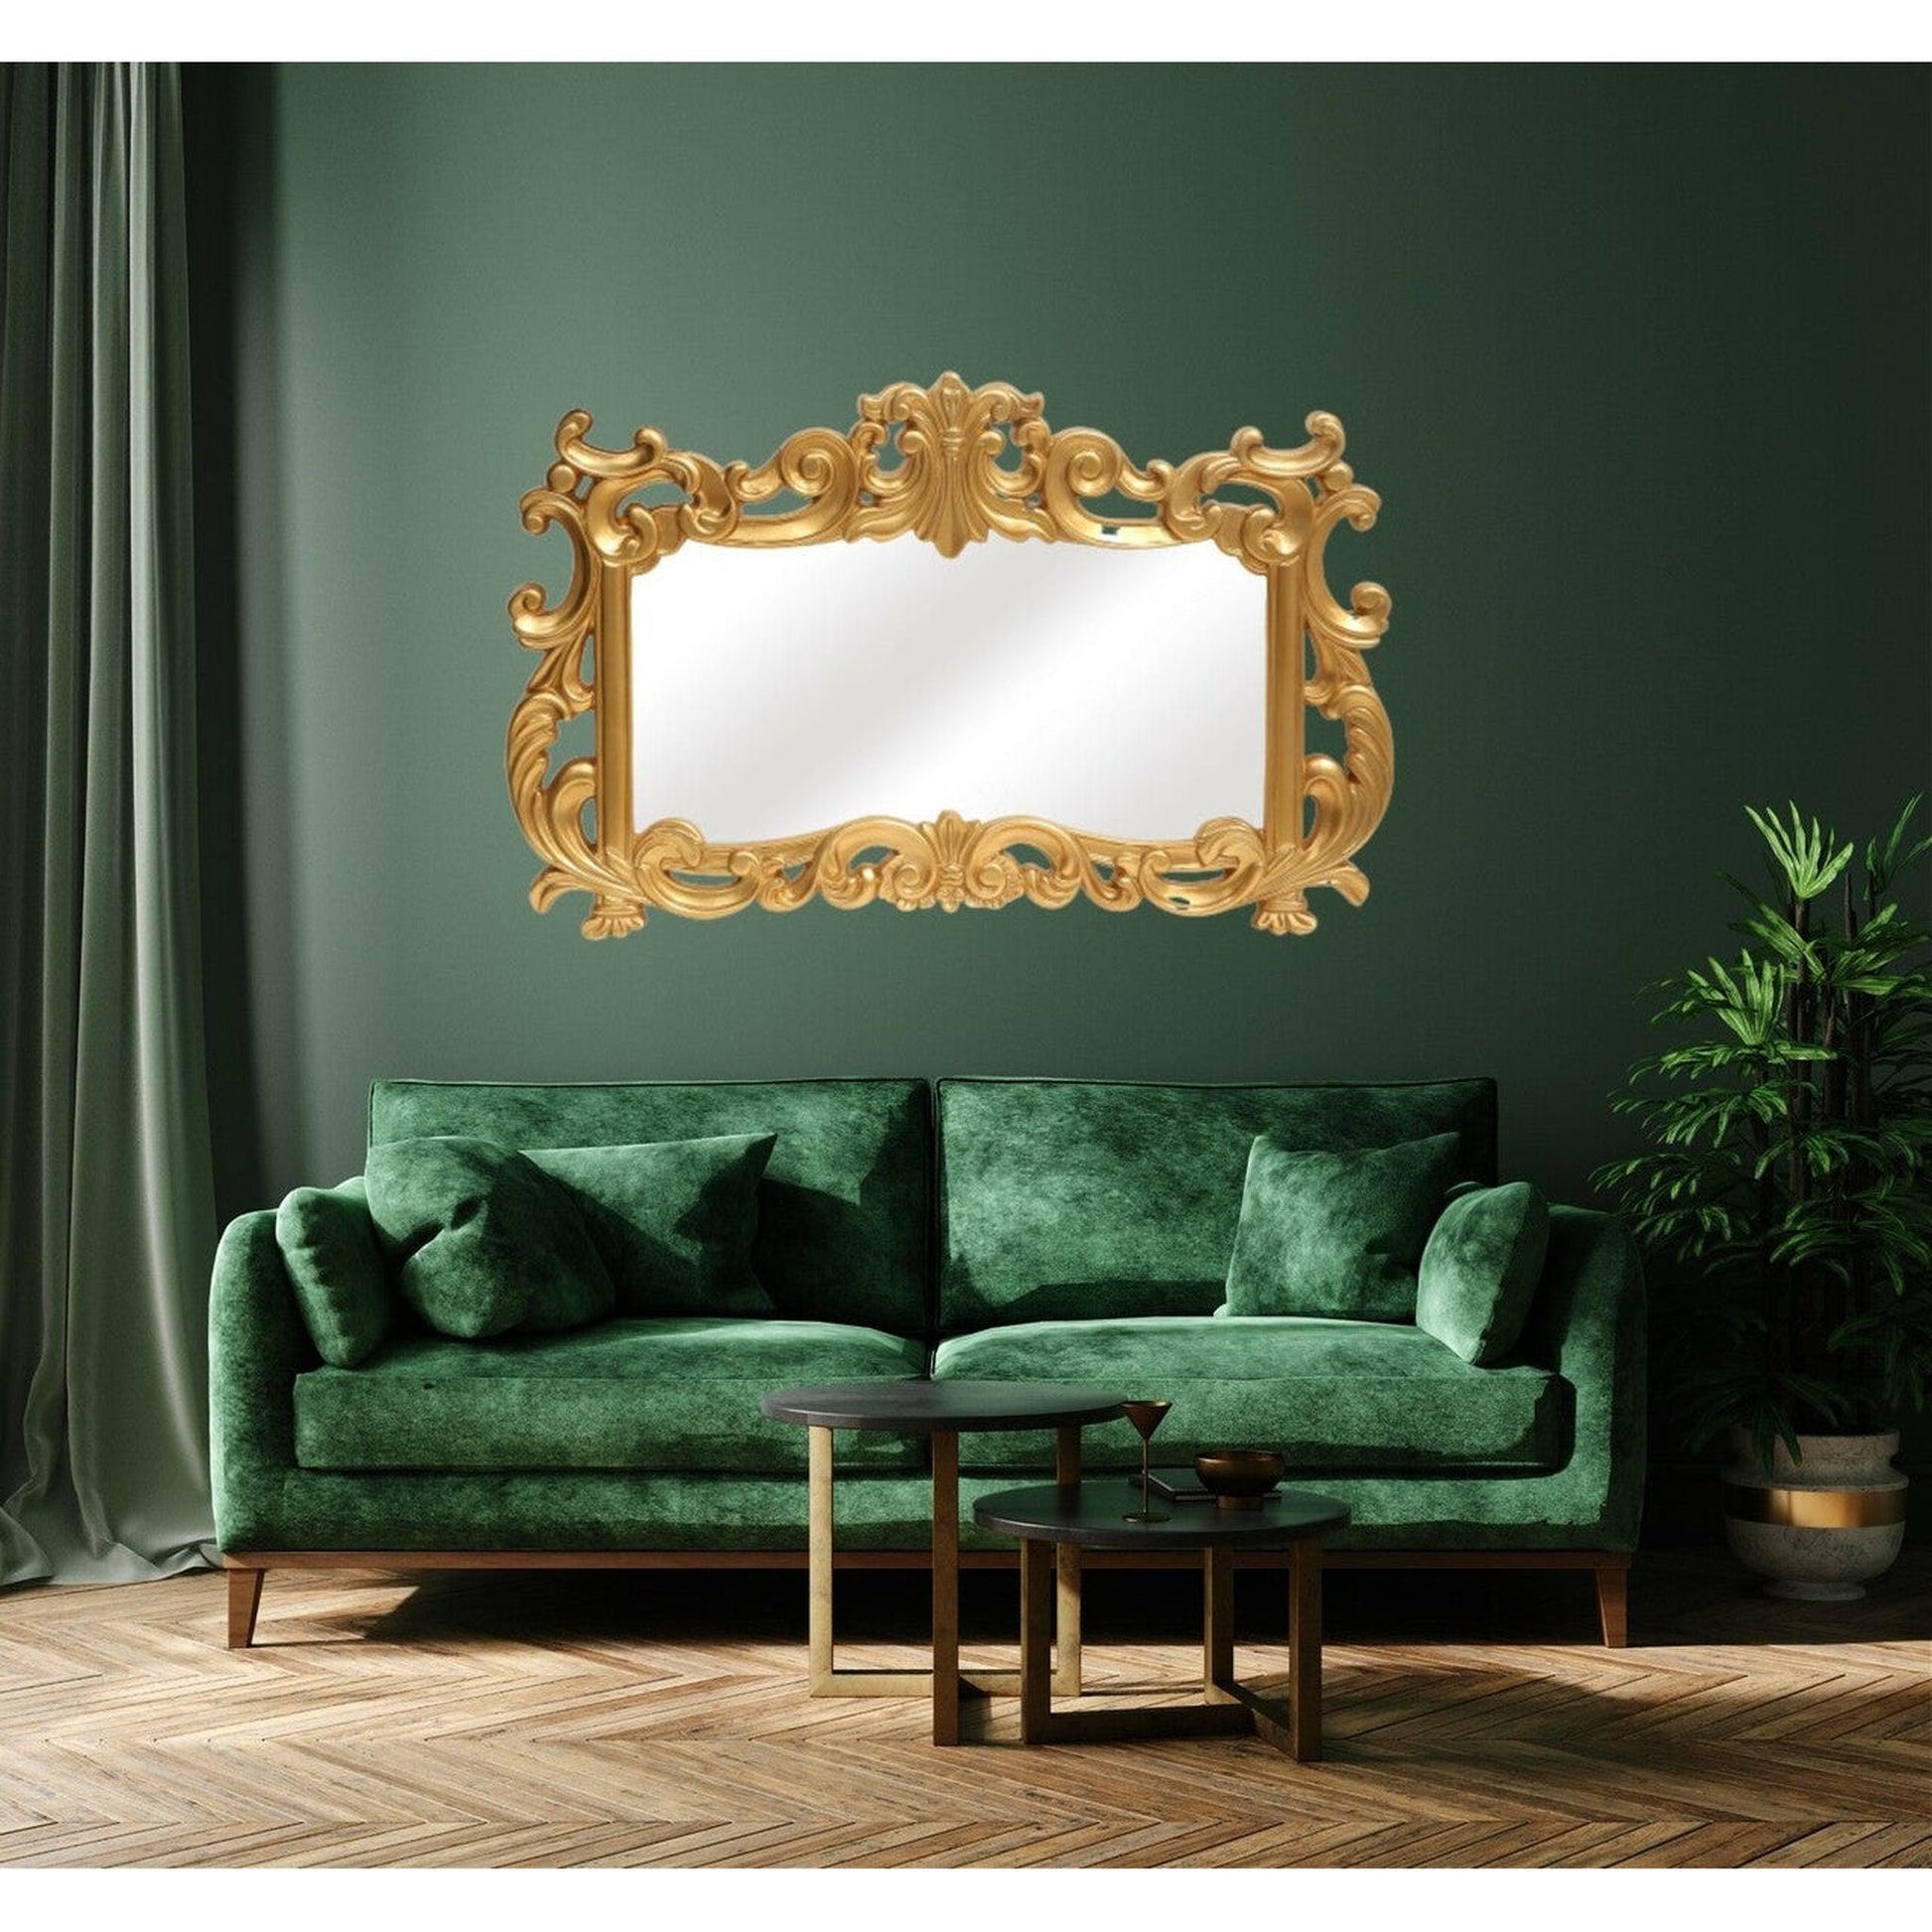 SBC Decor La Rue 46" x 28" Wall-Mounted Light Weight Resin Wall Mirror In Brushed Gold Finish